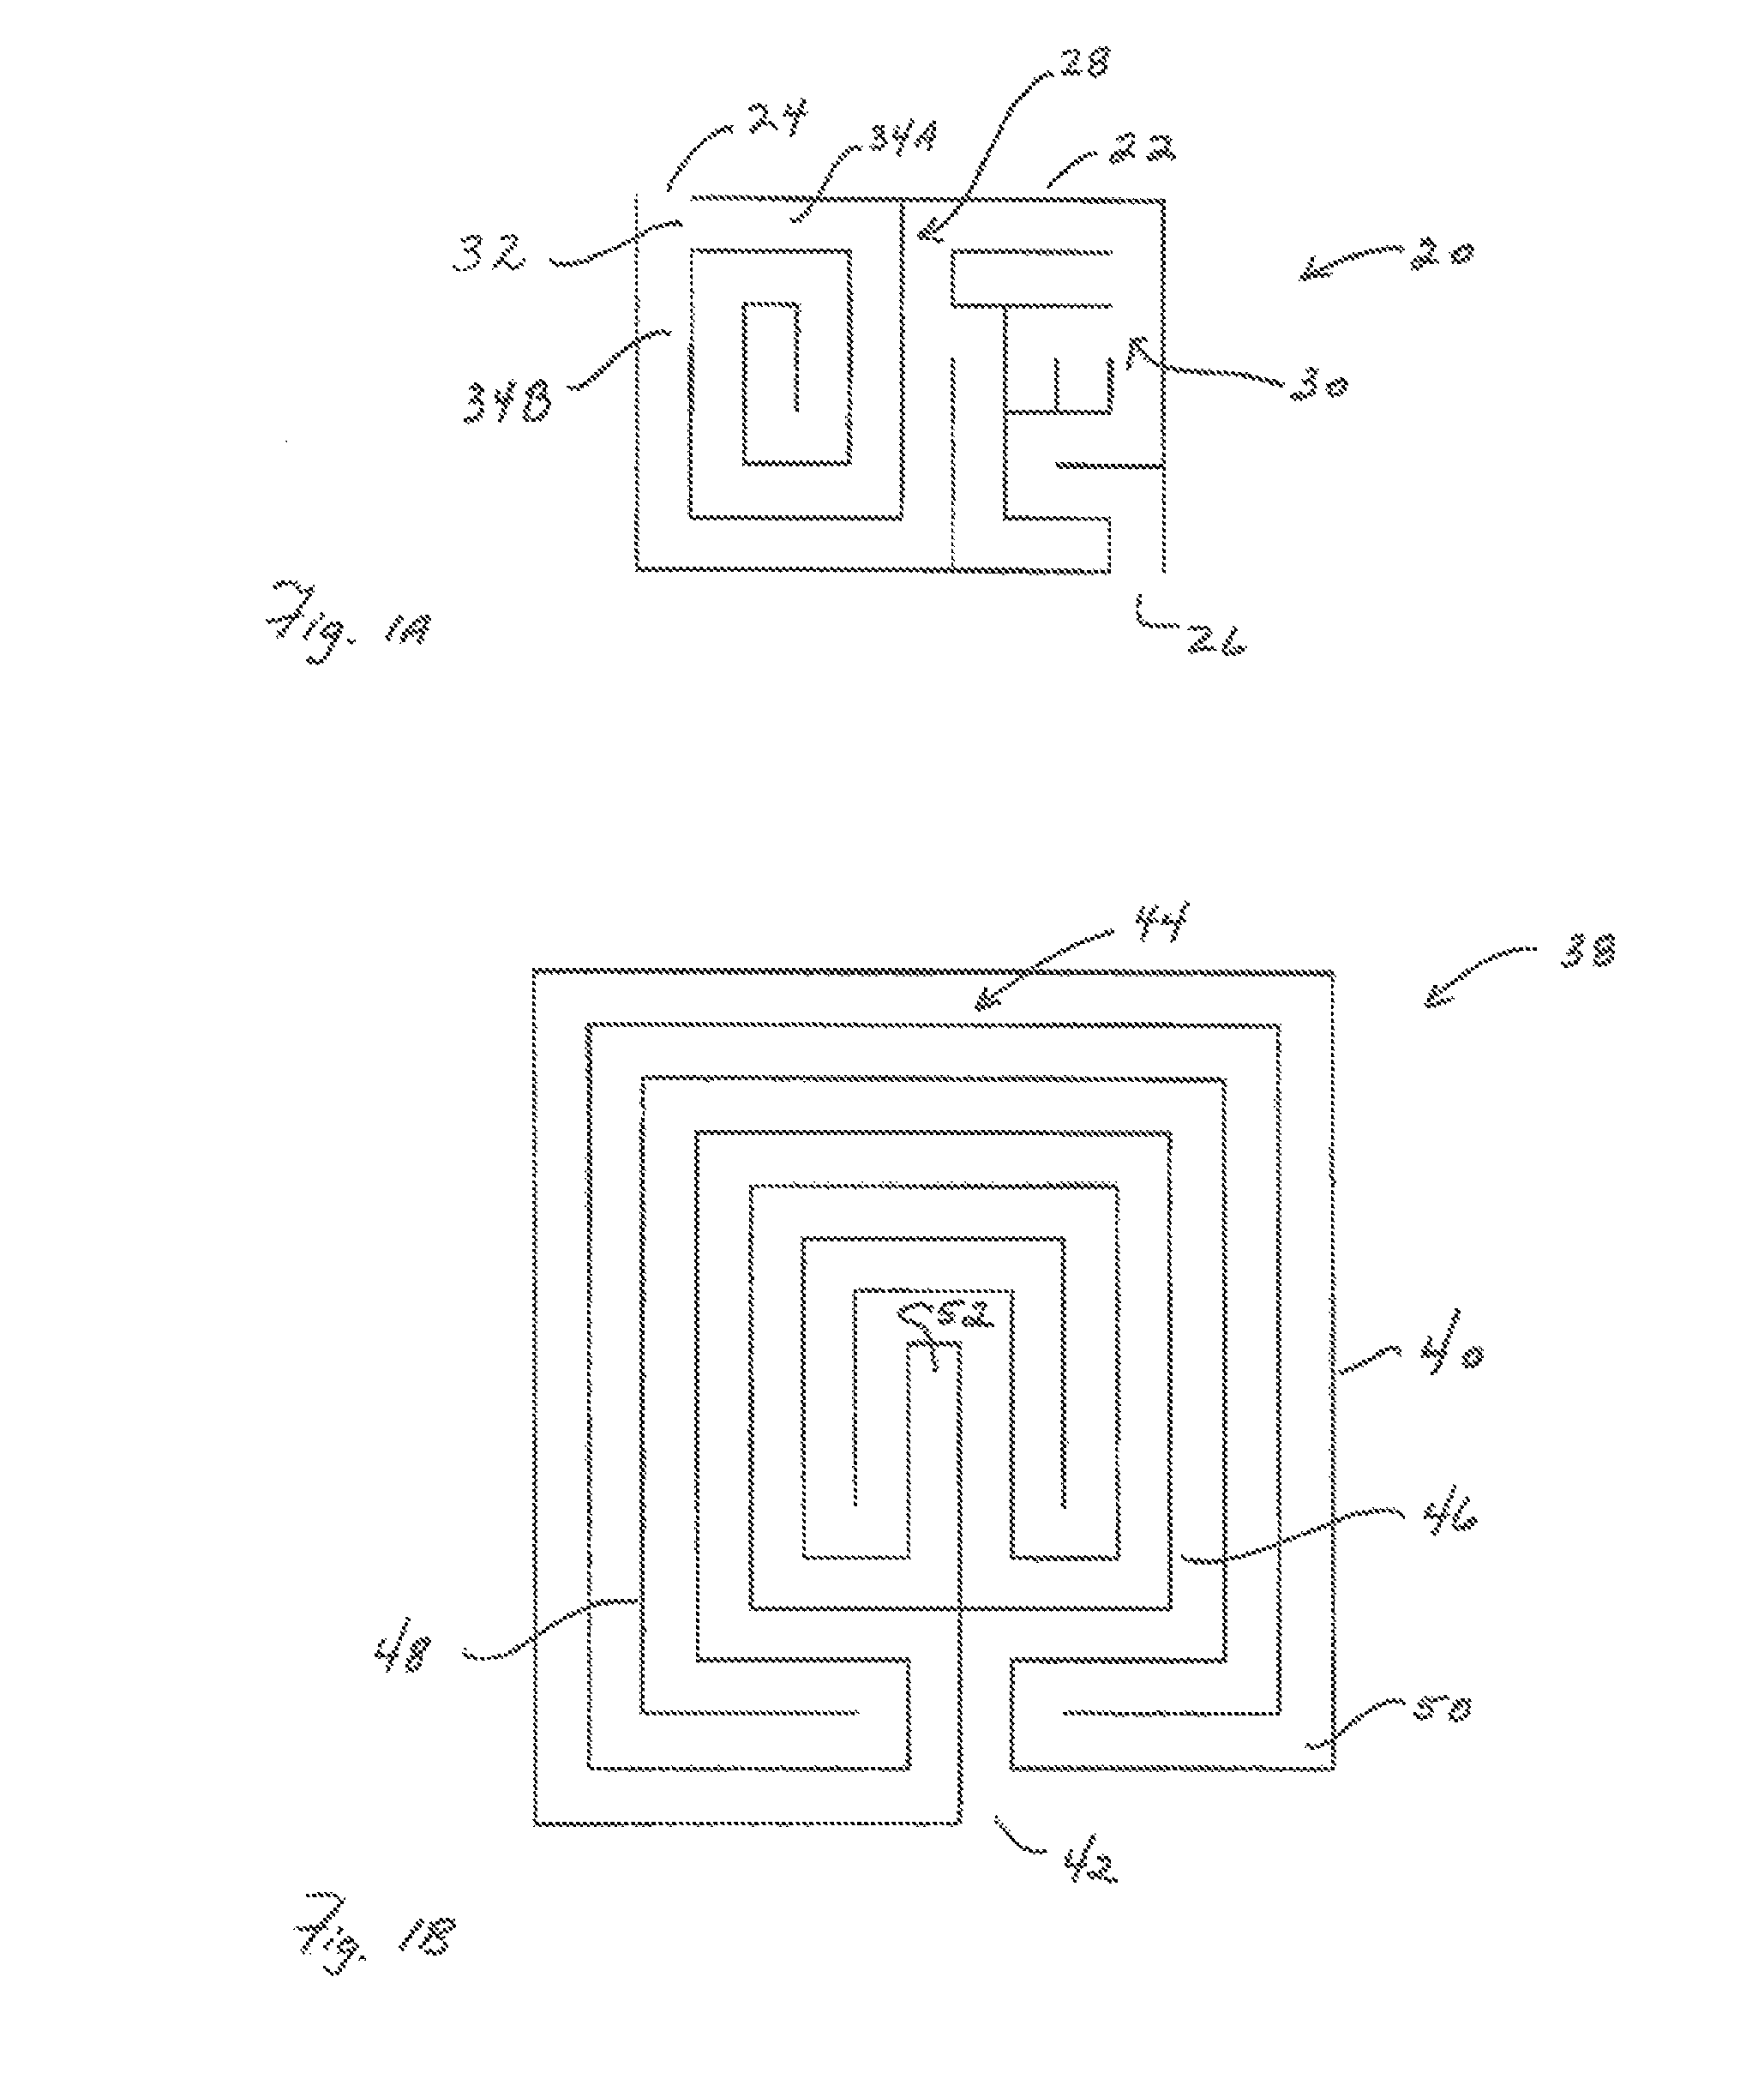 Apparatus for producing reconfigurable walls of water